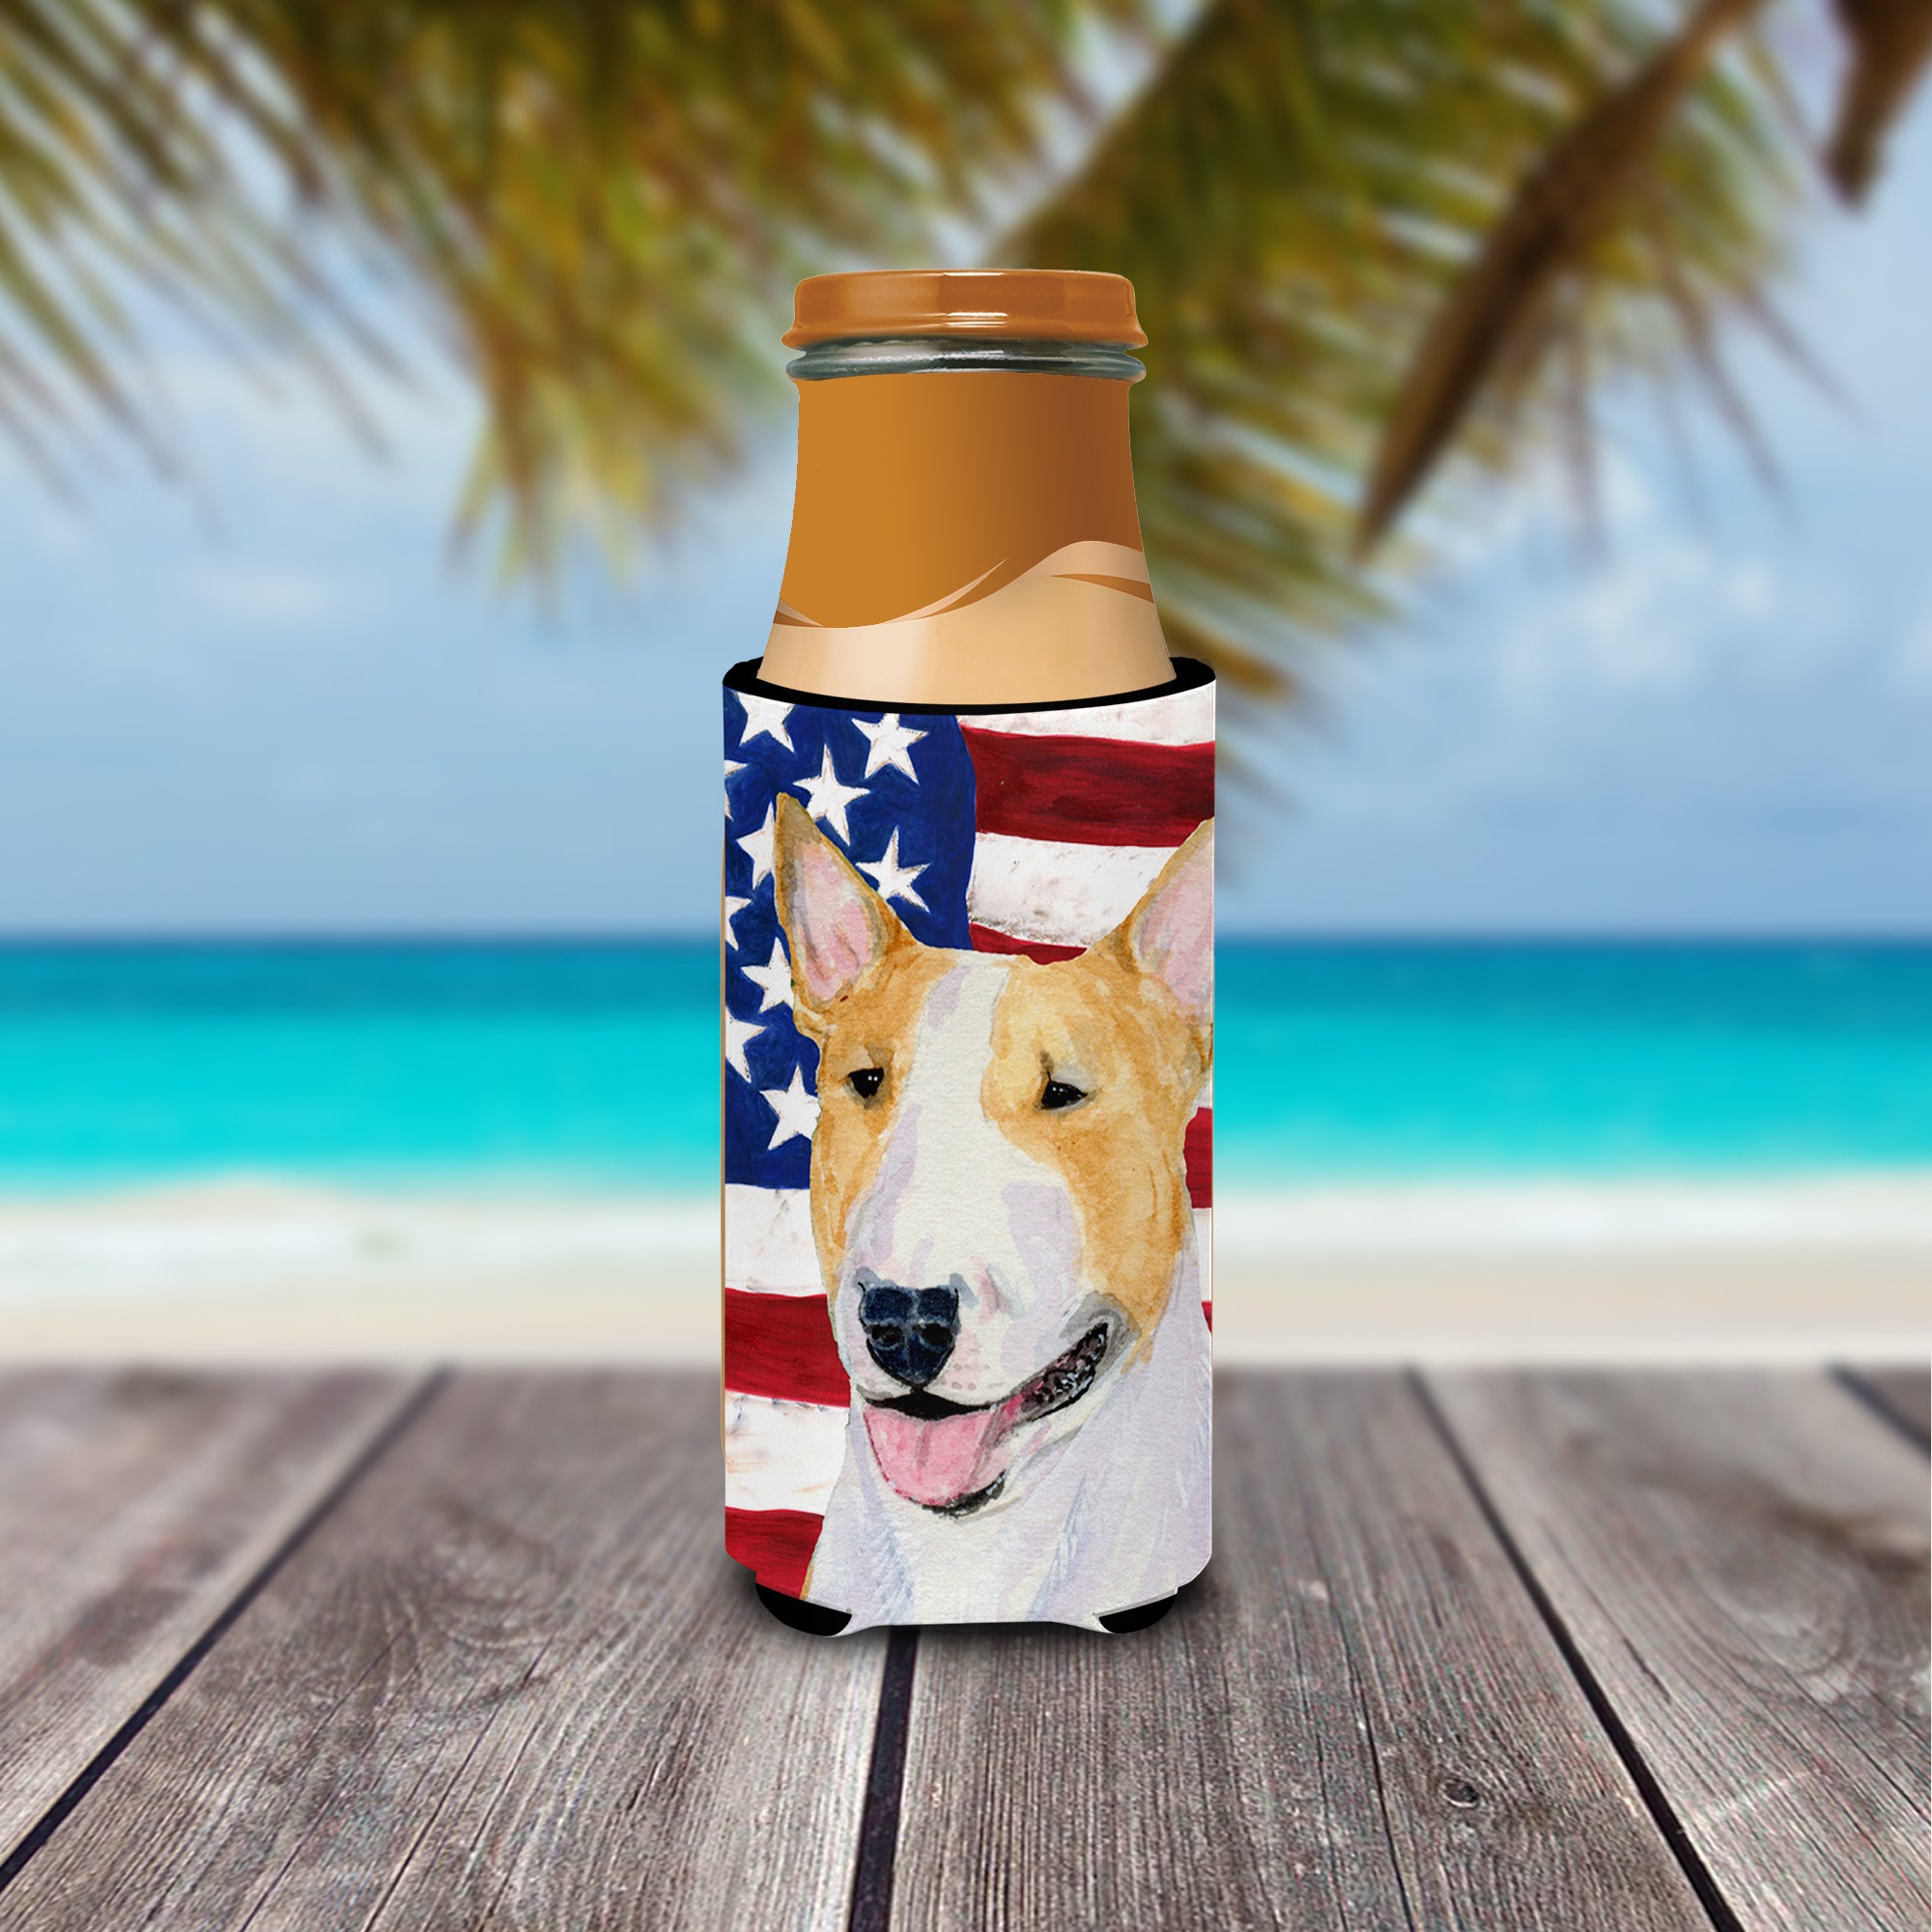 USA American Flag with Bull Terrier Ultra Beverage Insulators for slim cans SS4023MUK